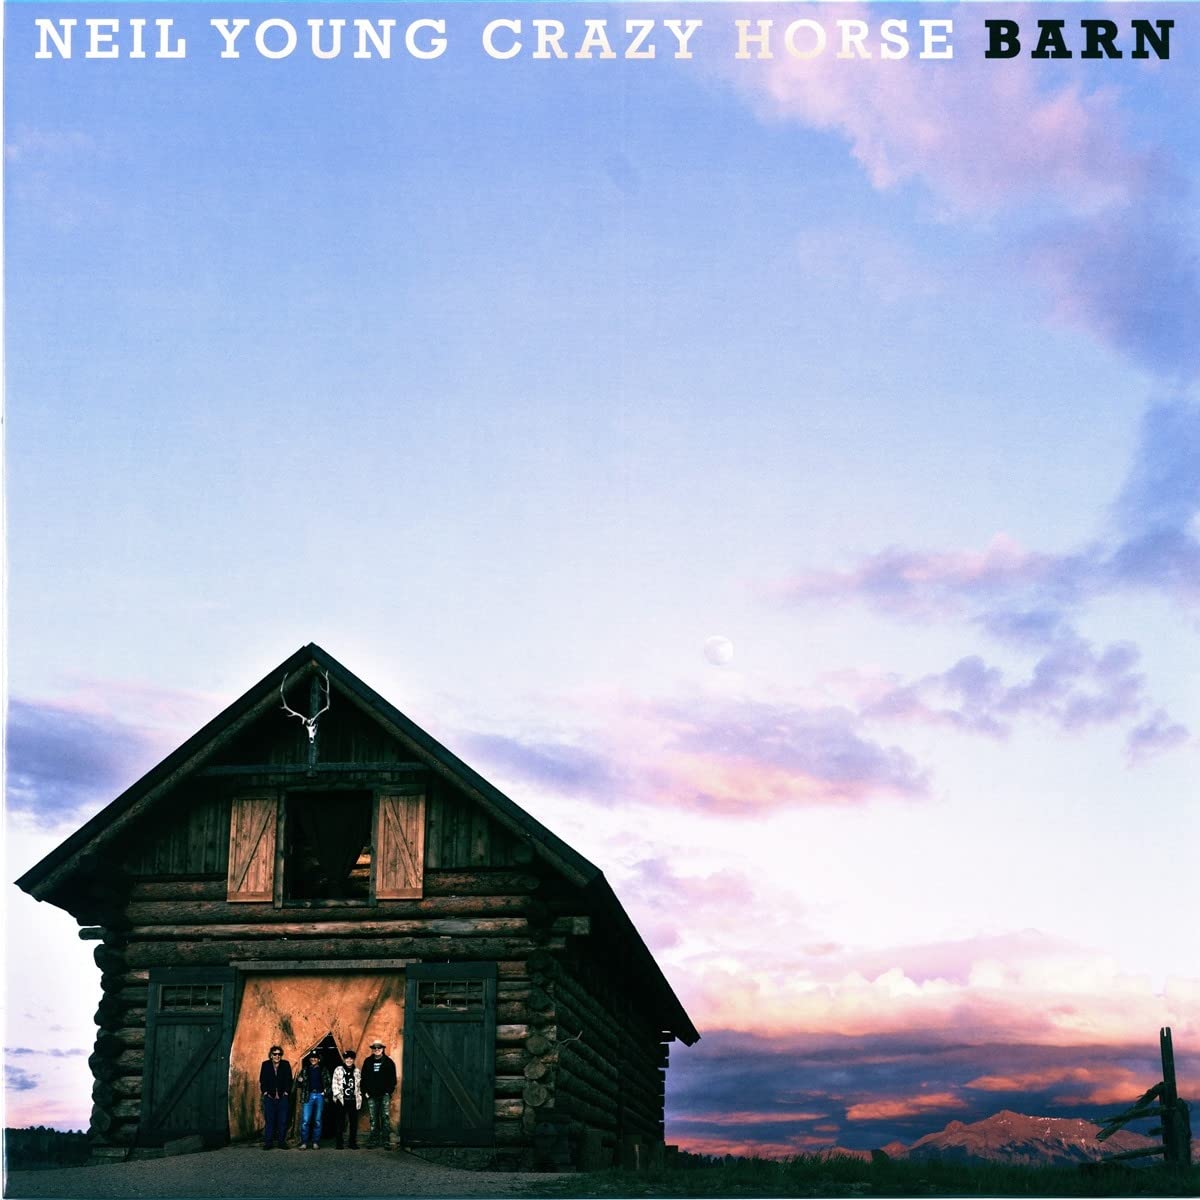 Neil Young Barn cover artwork